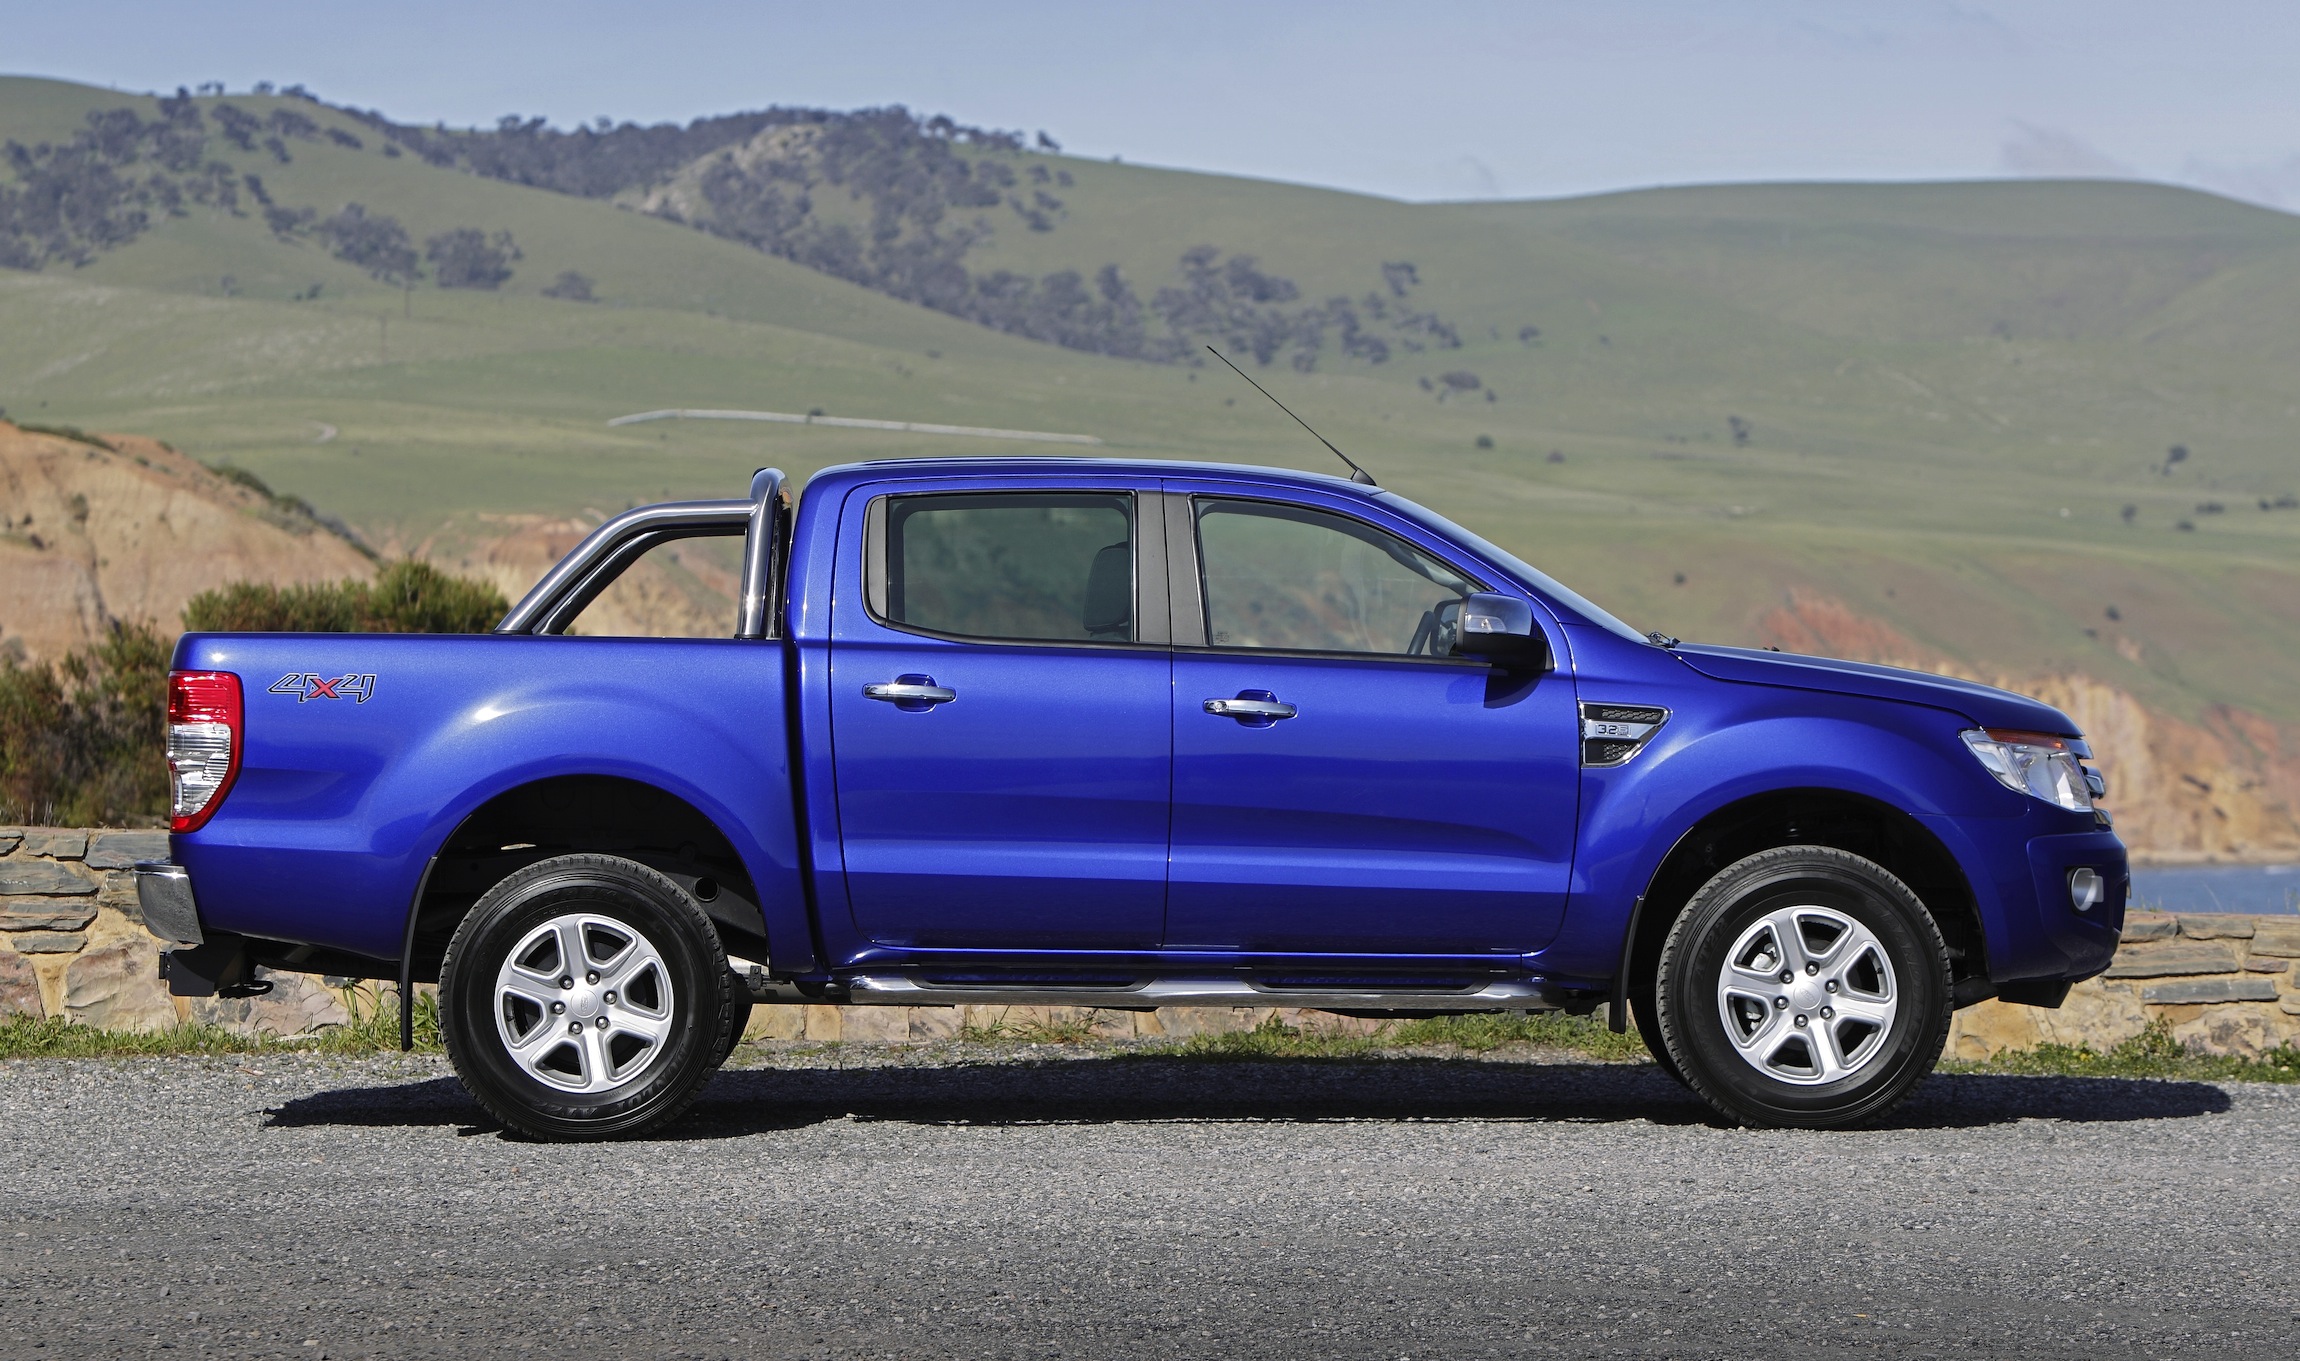 dp chip ford ranger review